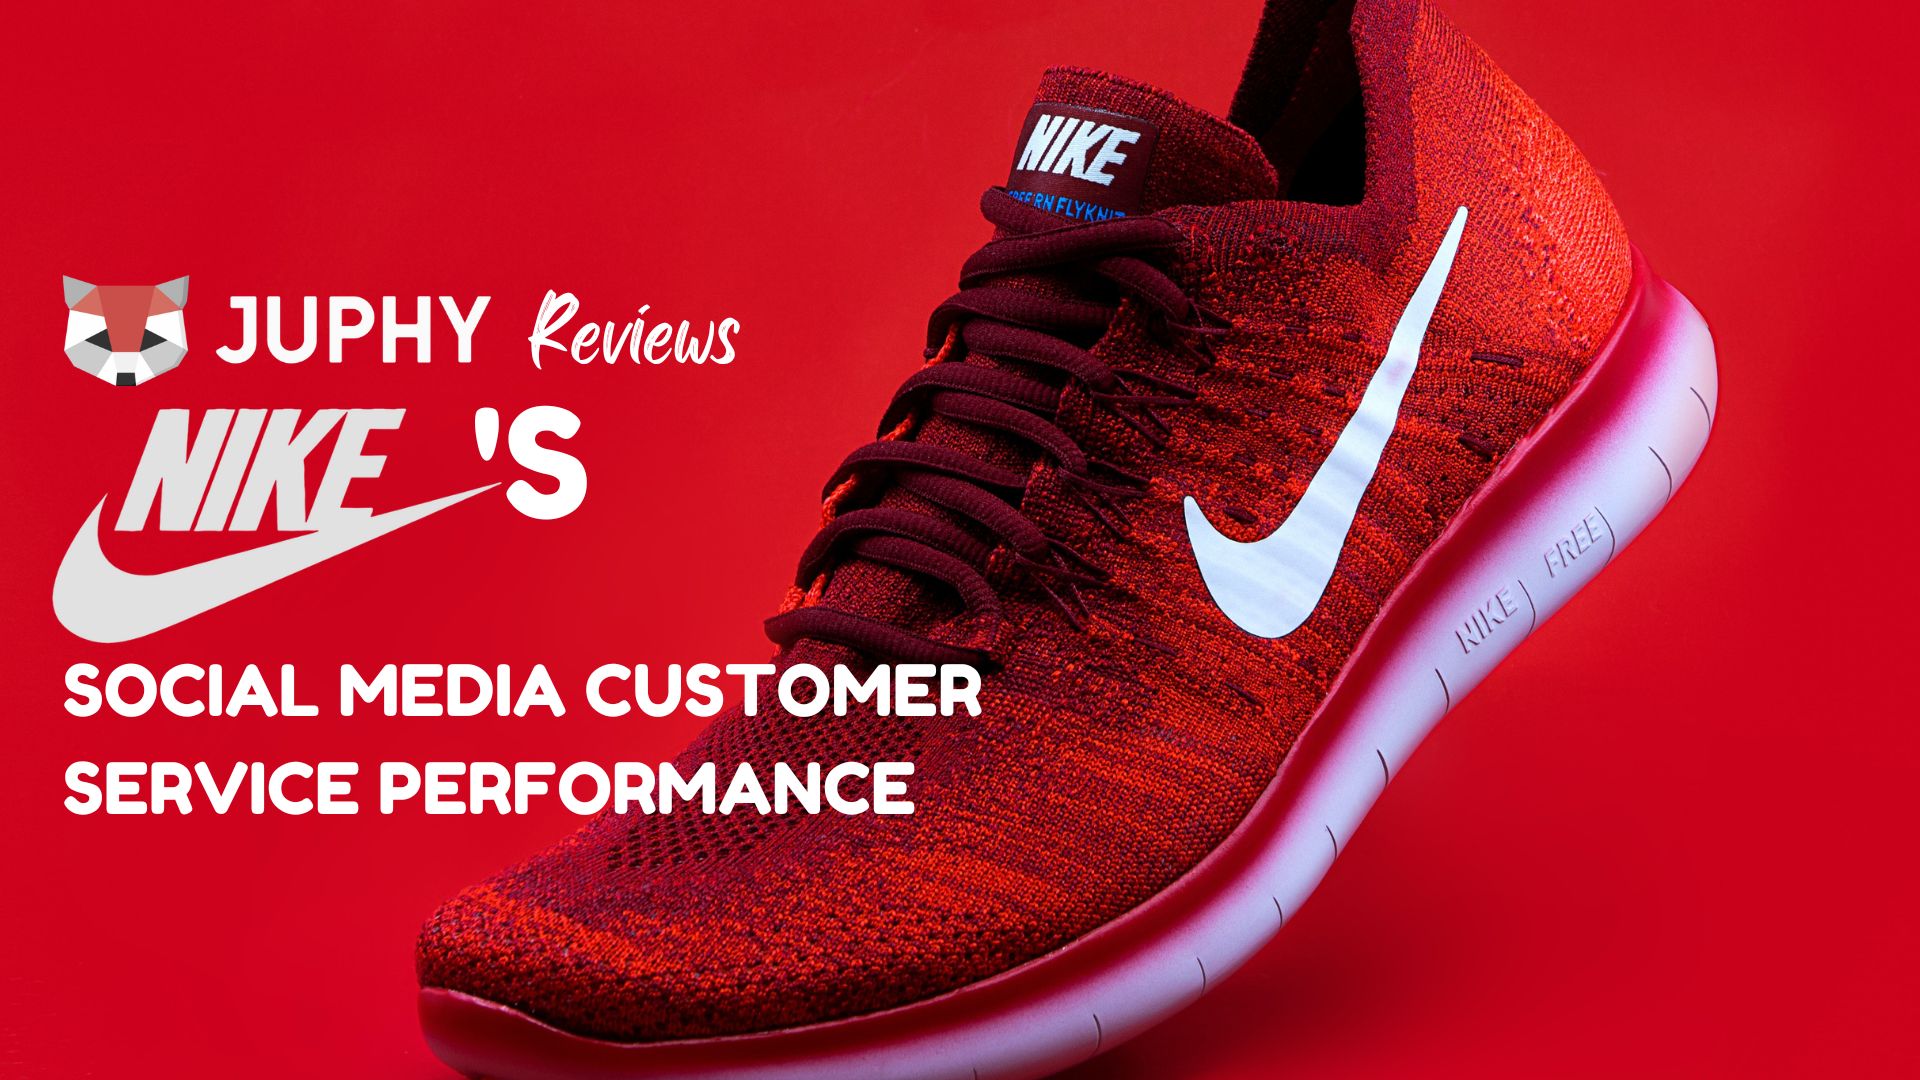 Internationale Circulaire Specialiseren NIKE's Social Media Customer Service Performance - Juphy